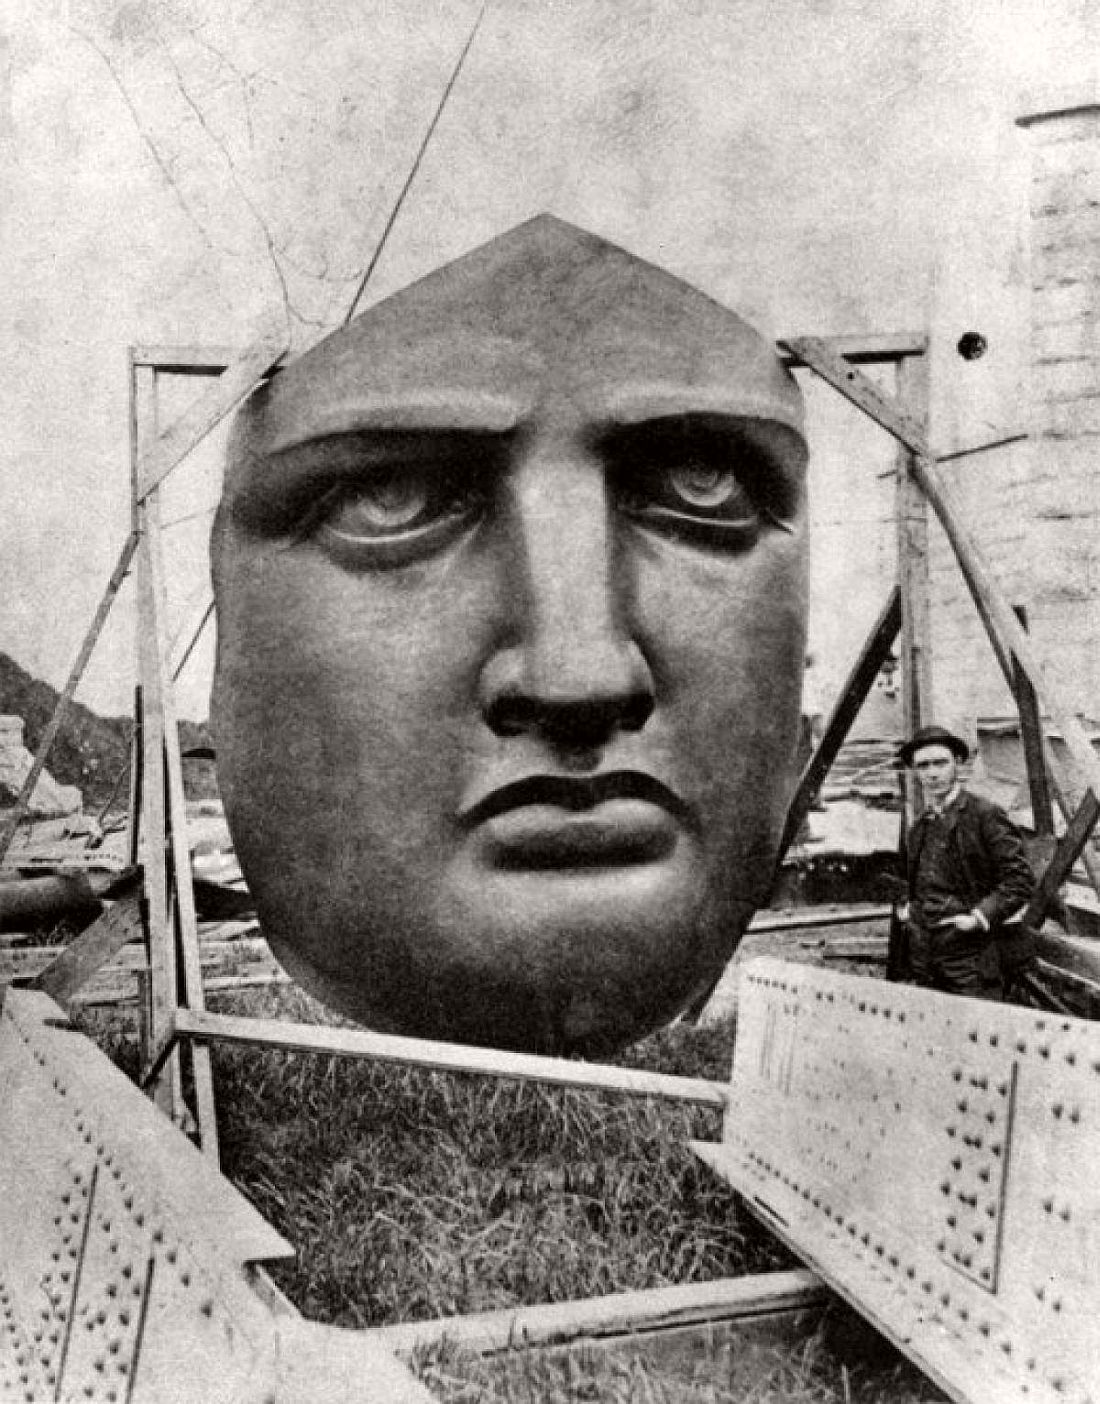 Unboxing the Statue of Liberty 1885